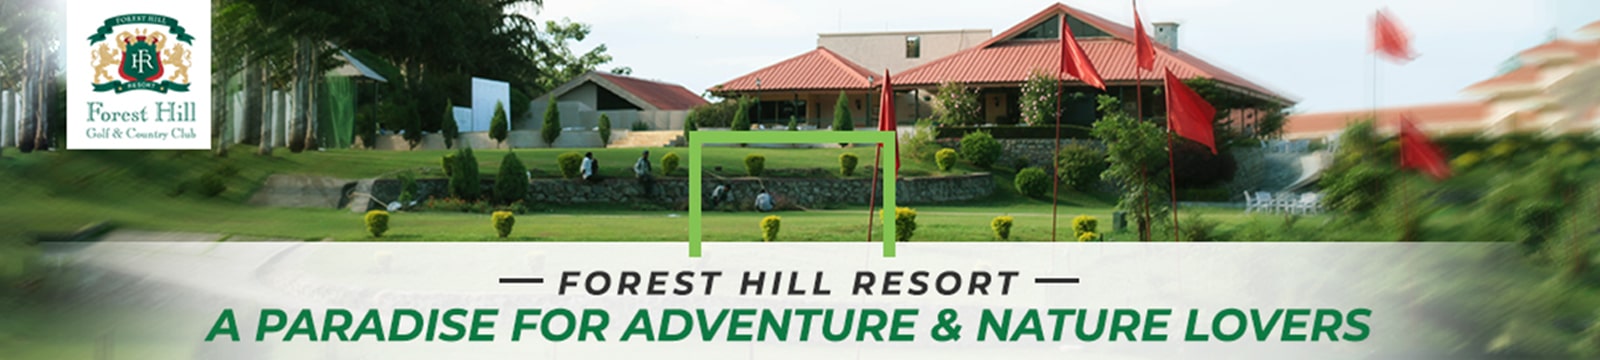 Forest Hill Resort Chandigarh – A Paradise for Adventure & Nature Lovers